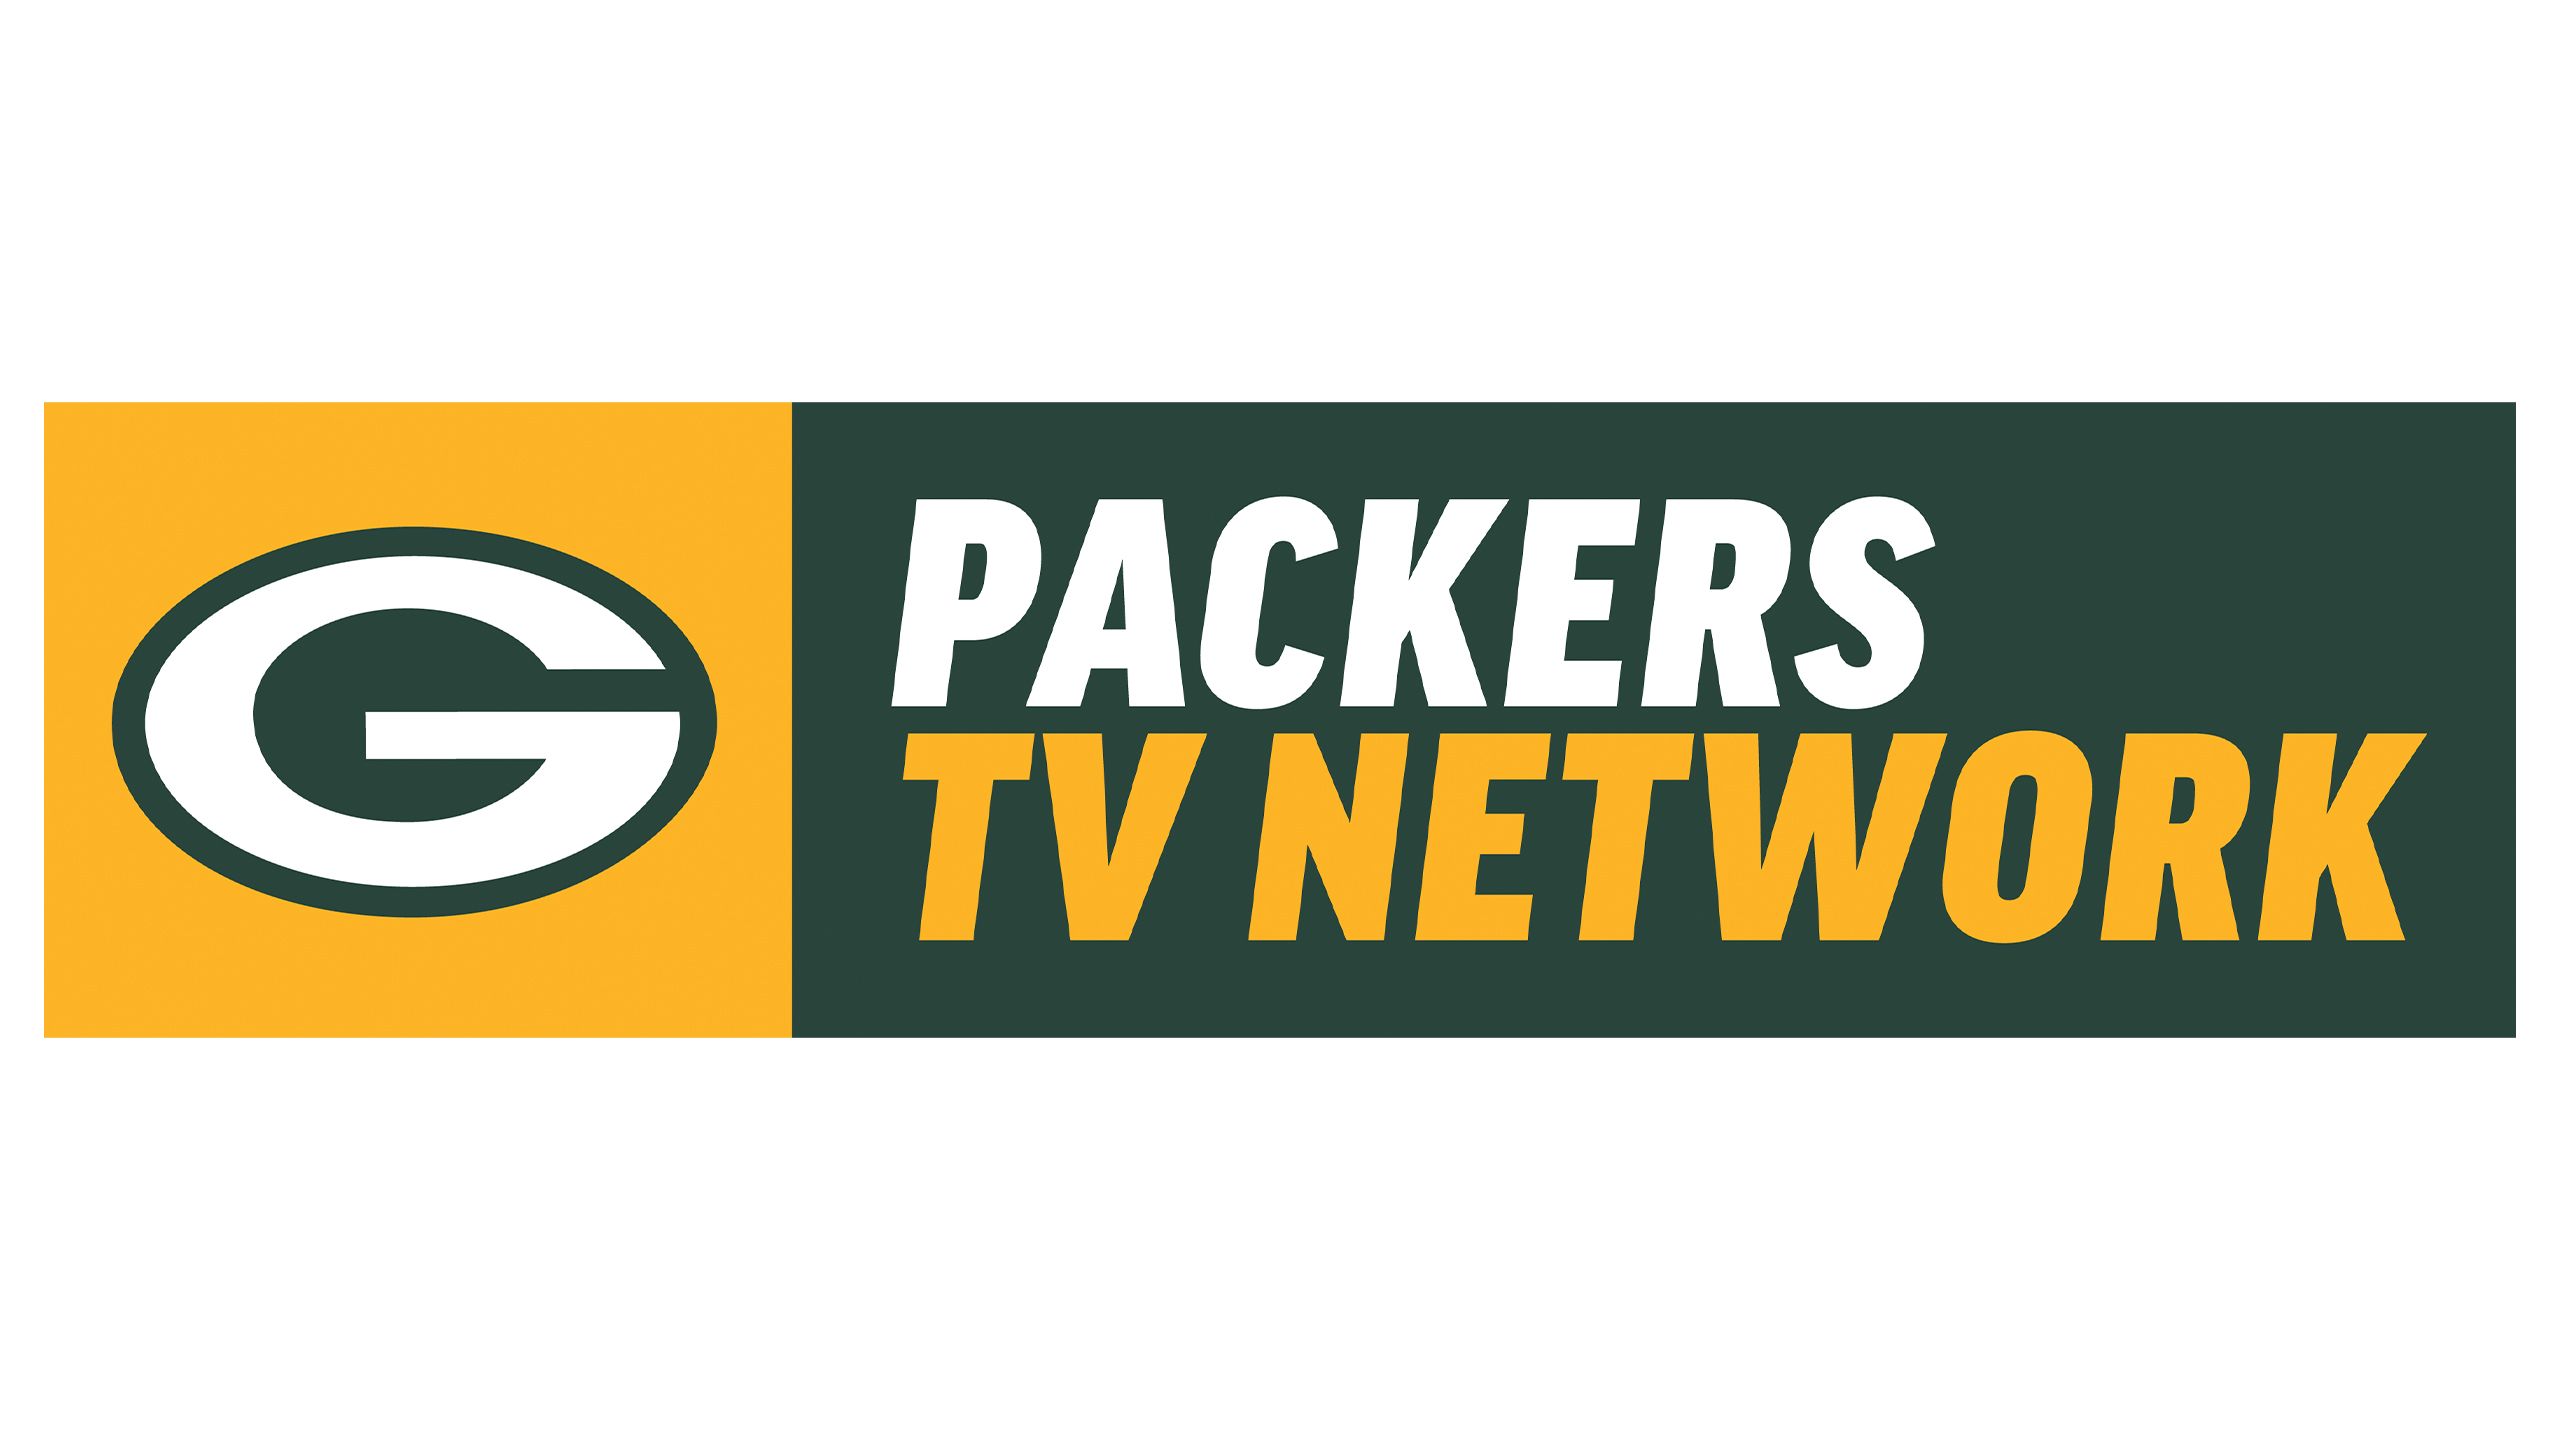 what channel to watch packers today